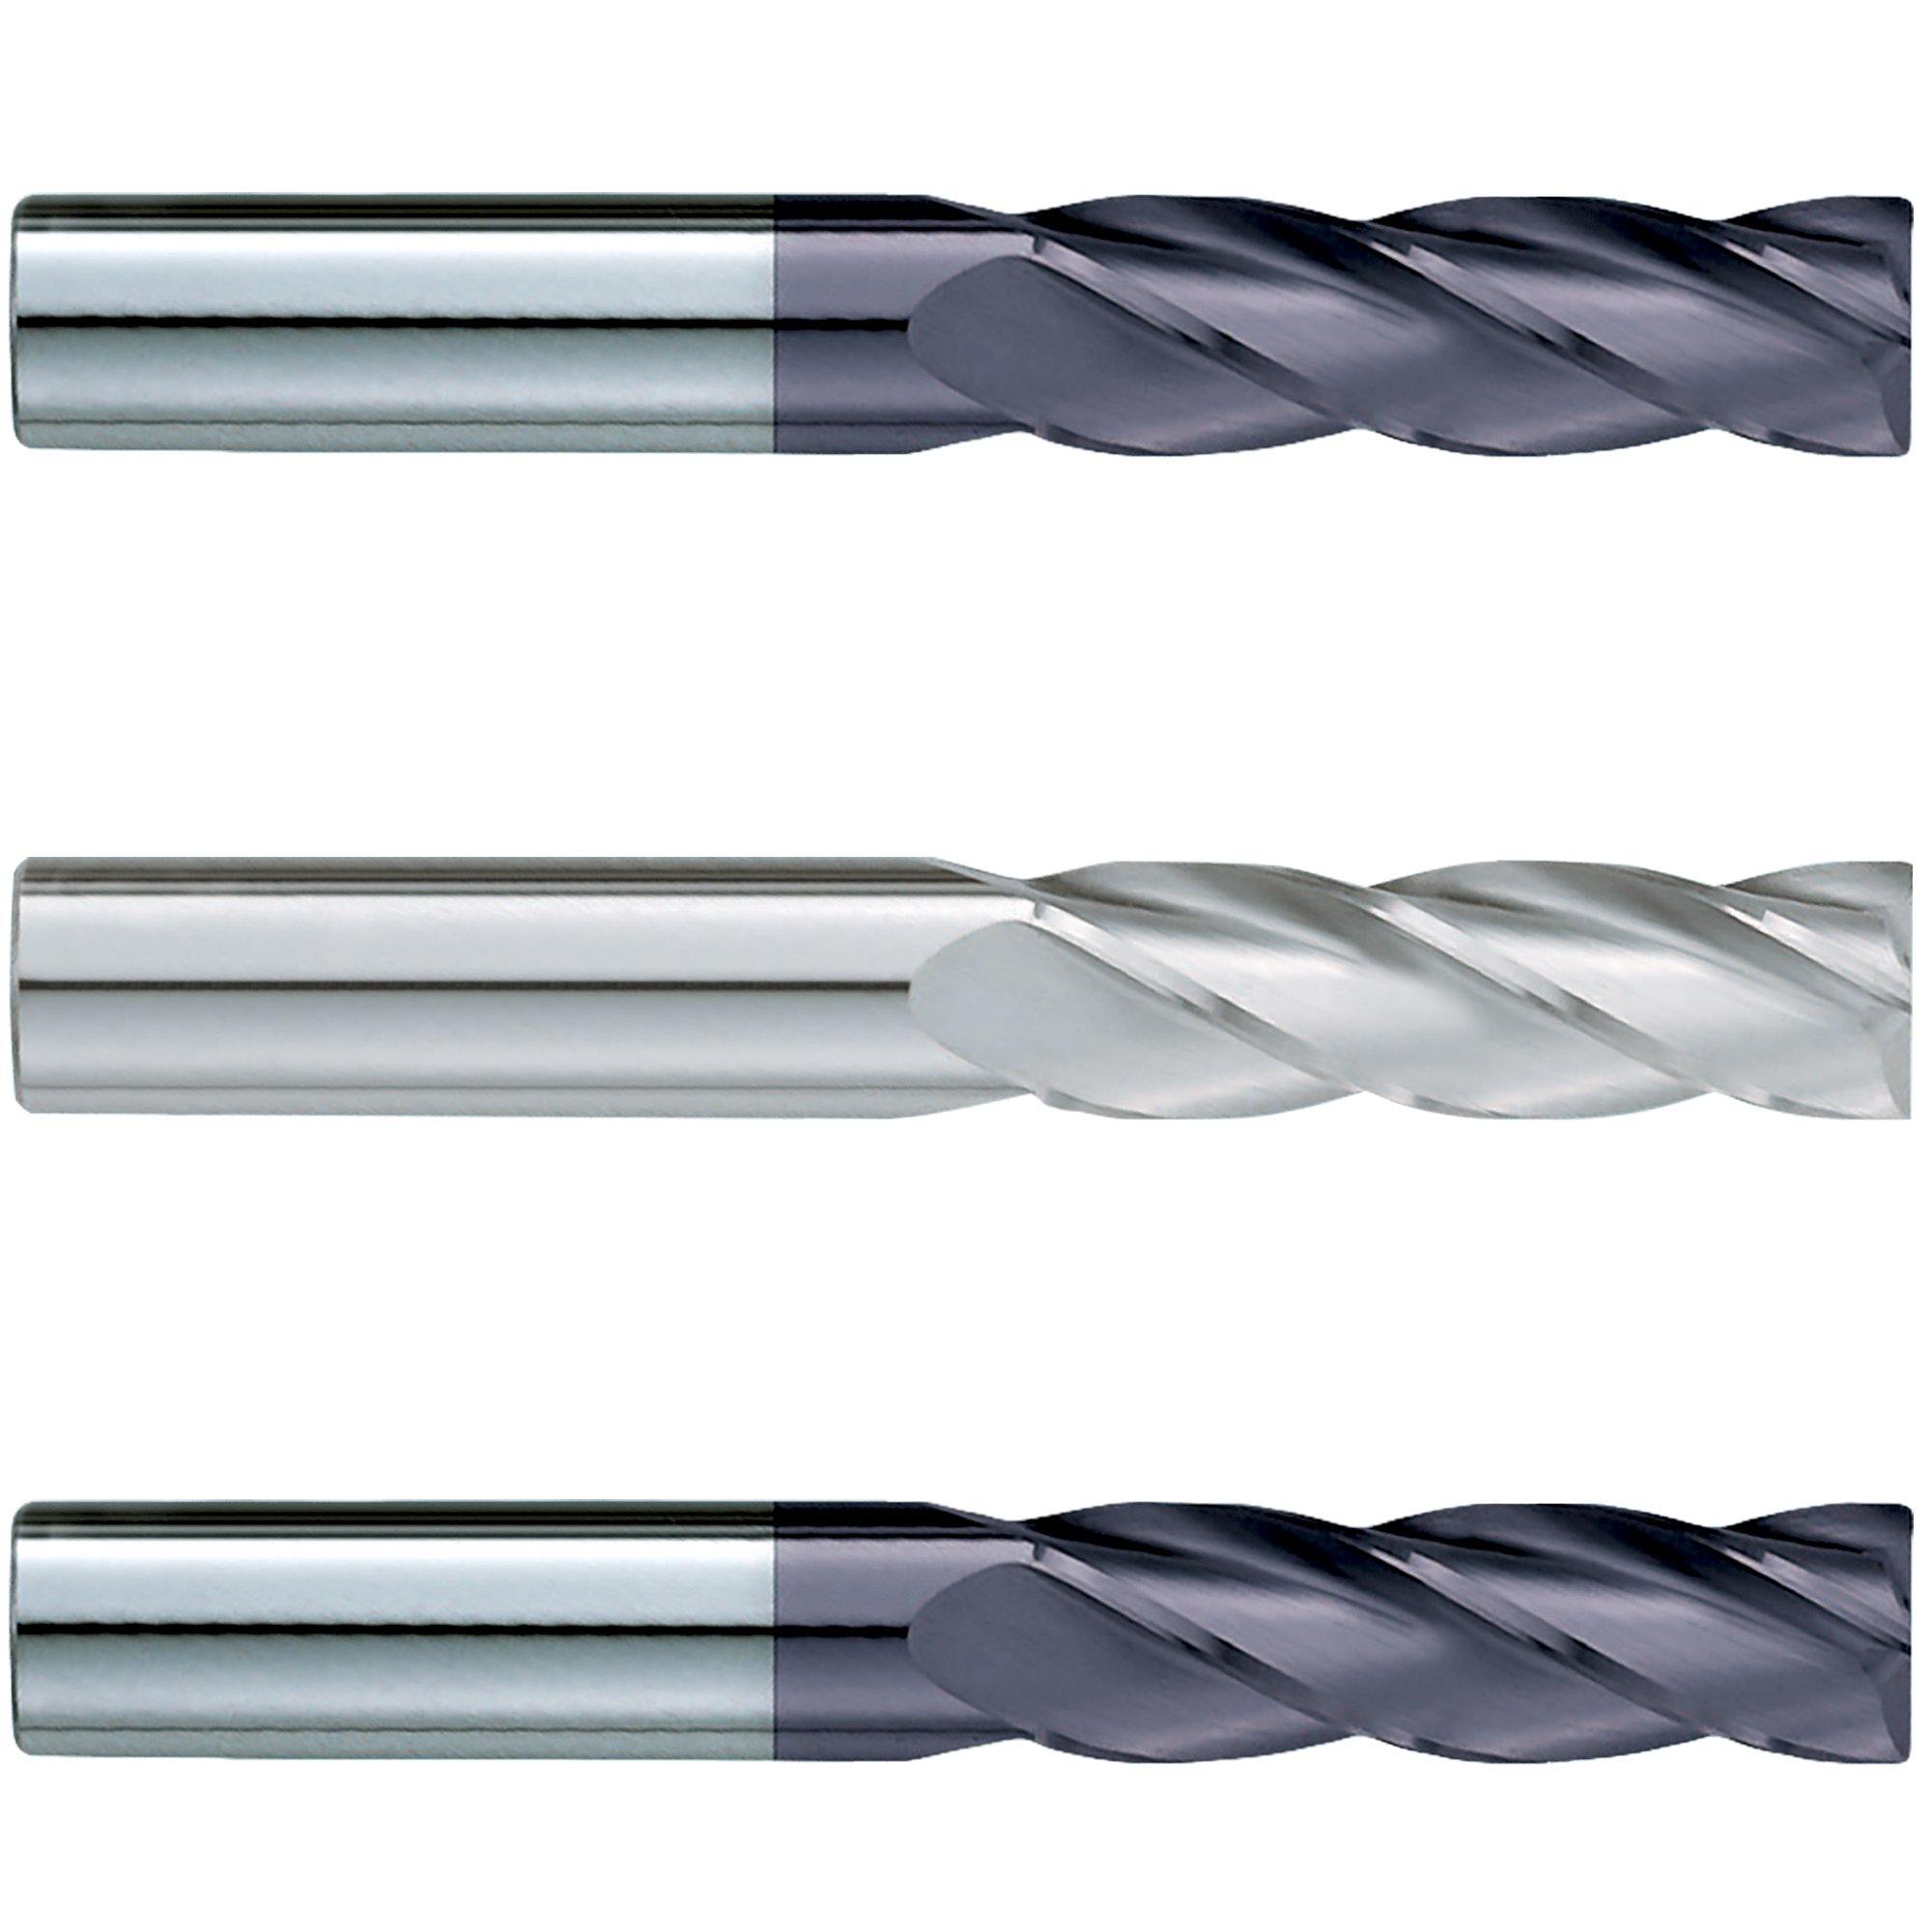 (3 Pack) 5/8" x 3" x 6" Extra Long Square Carbide End Mill - The End Mill Store 